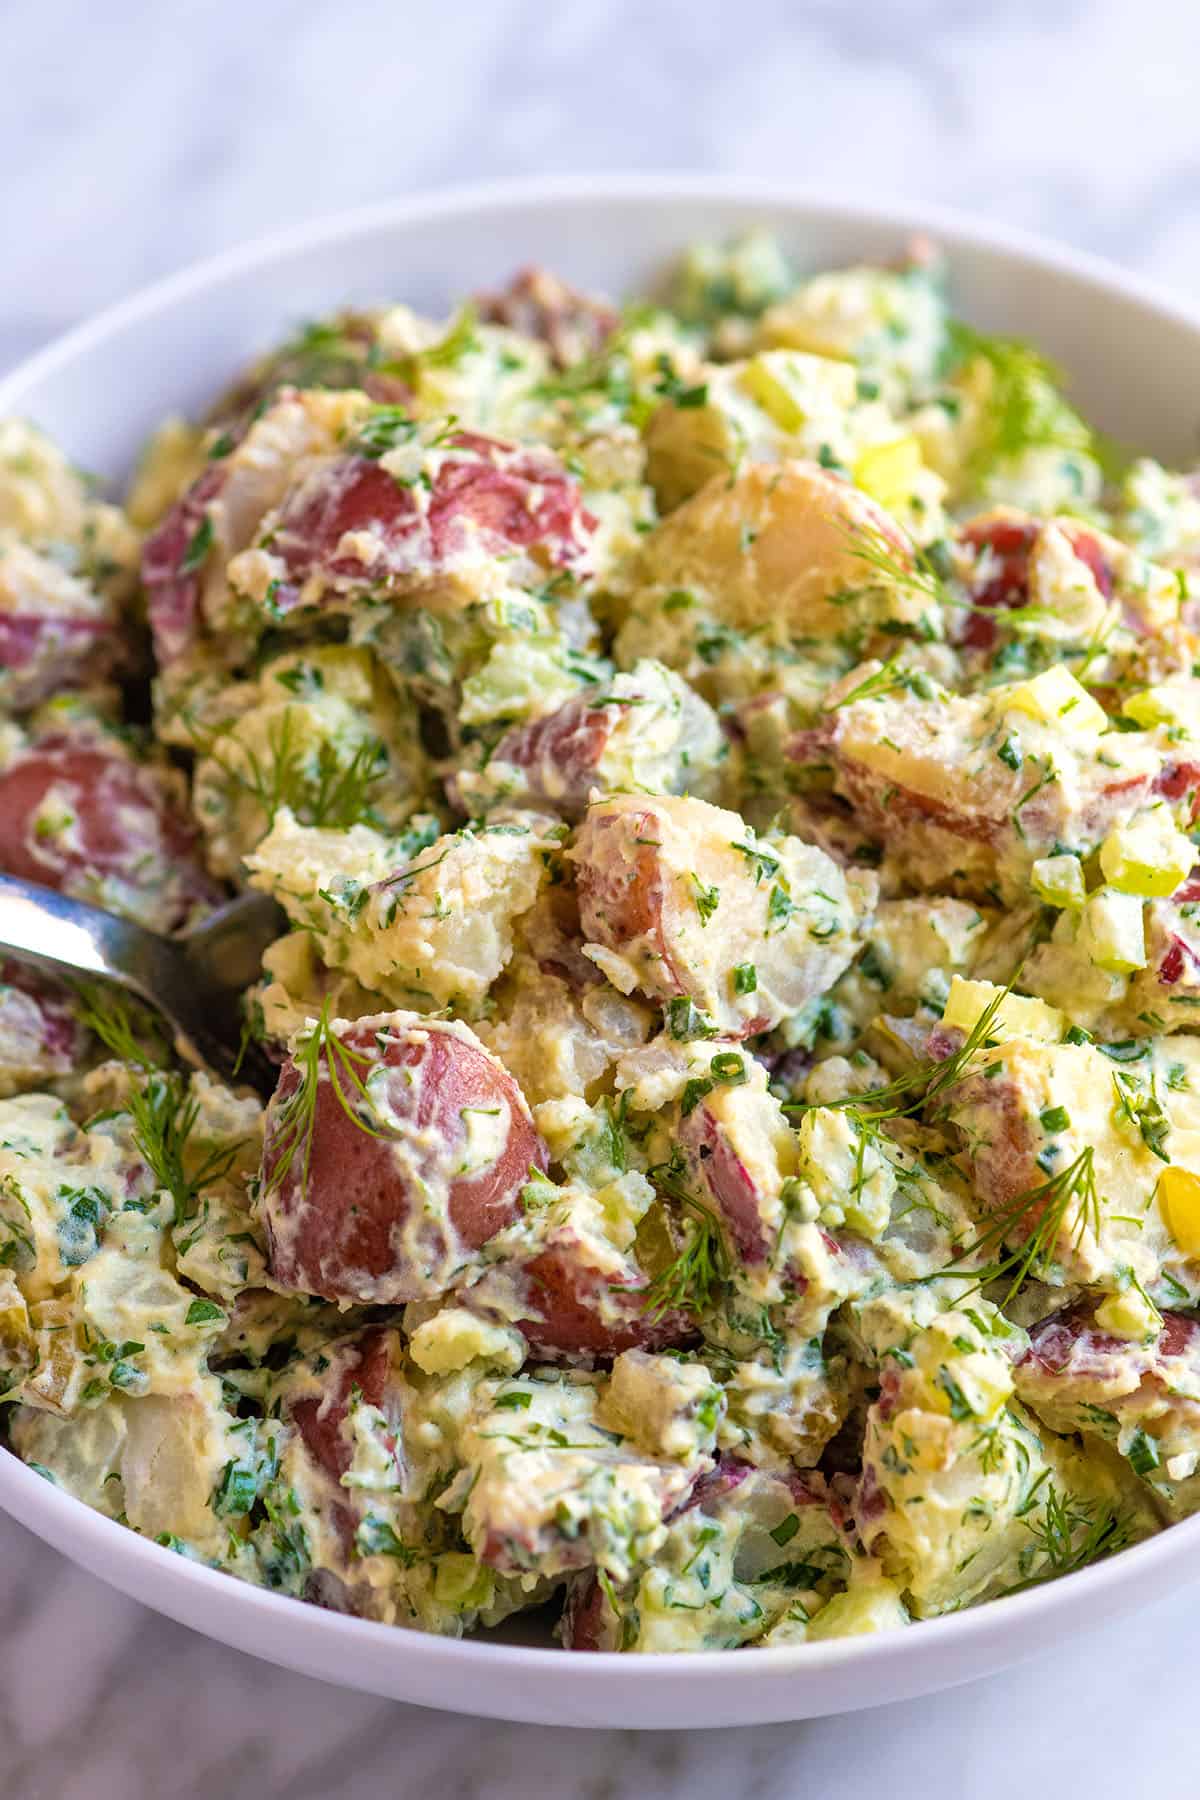 A bowl of red potato salad made with a creamy dressing